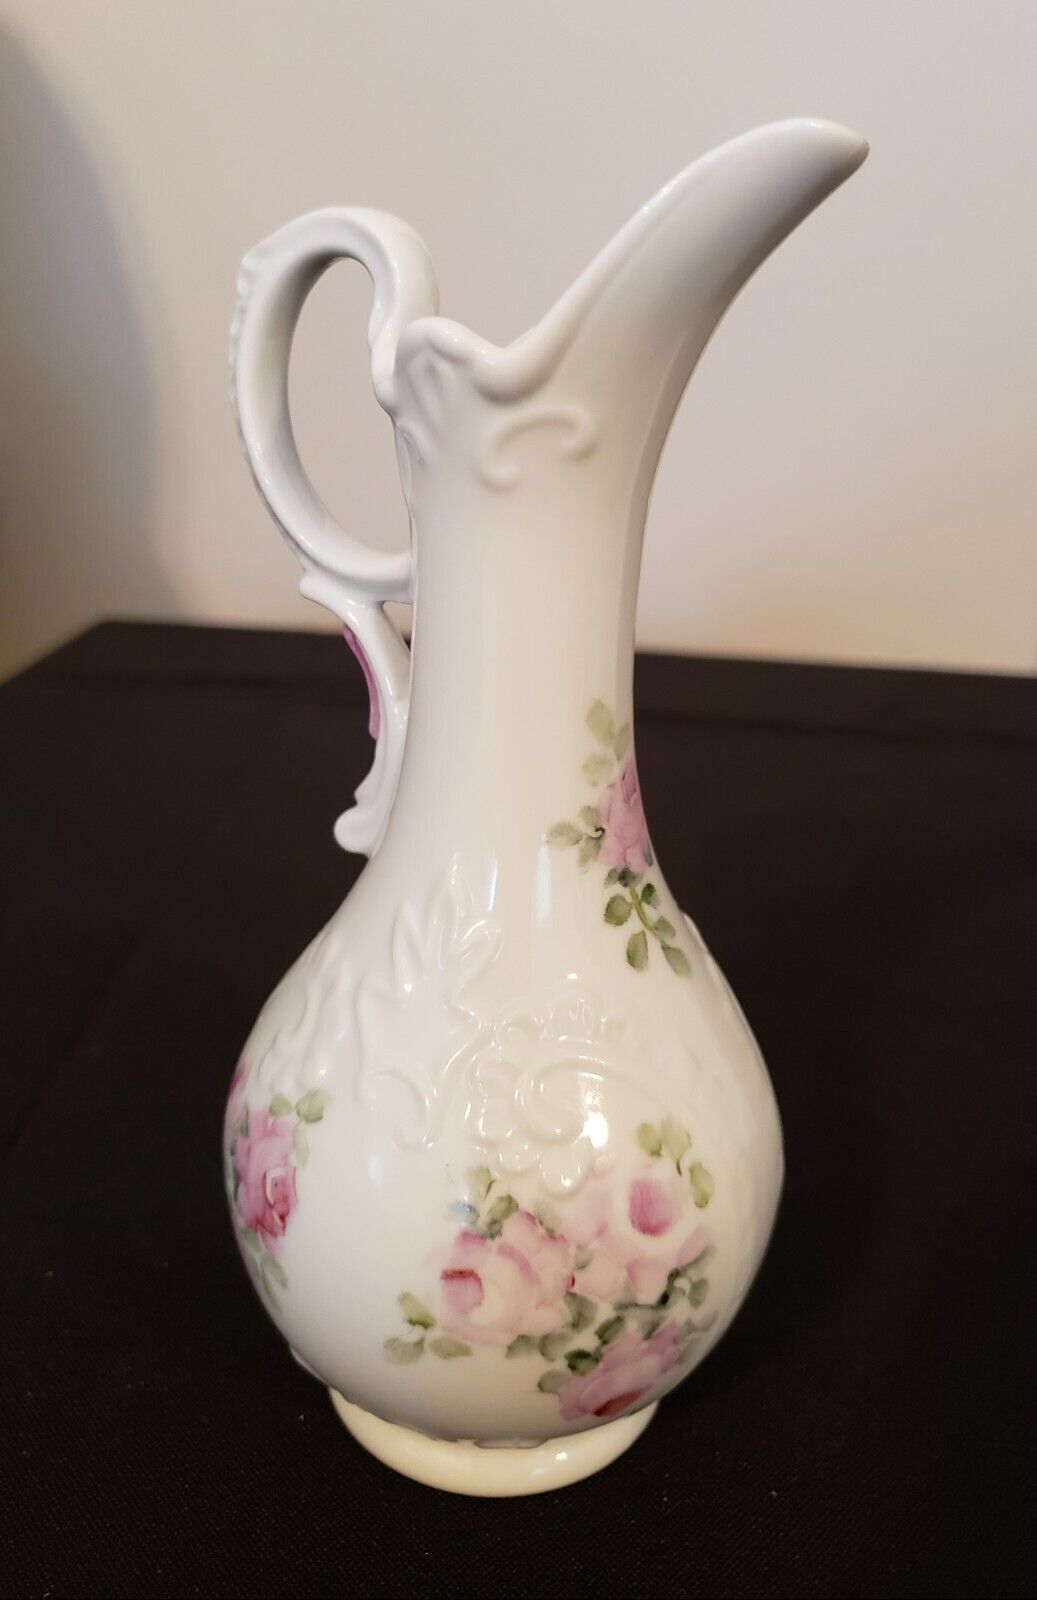 Handpainted Vase  Pitcher Signed Chic Shabby Cottage Victorian Decor Floral